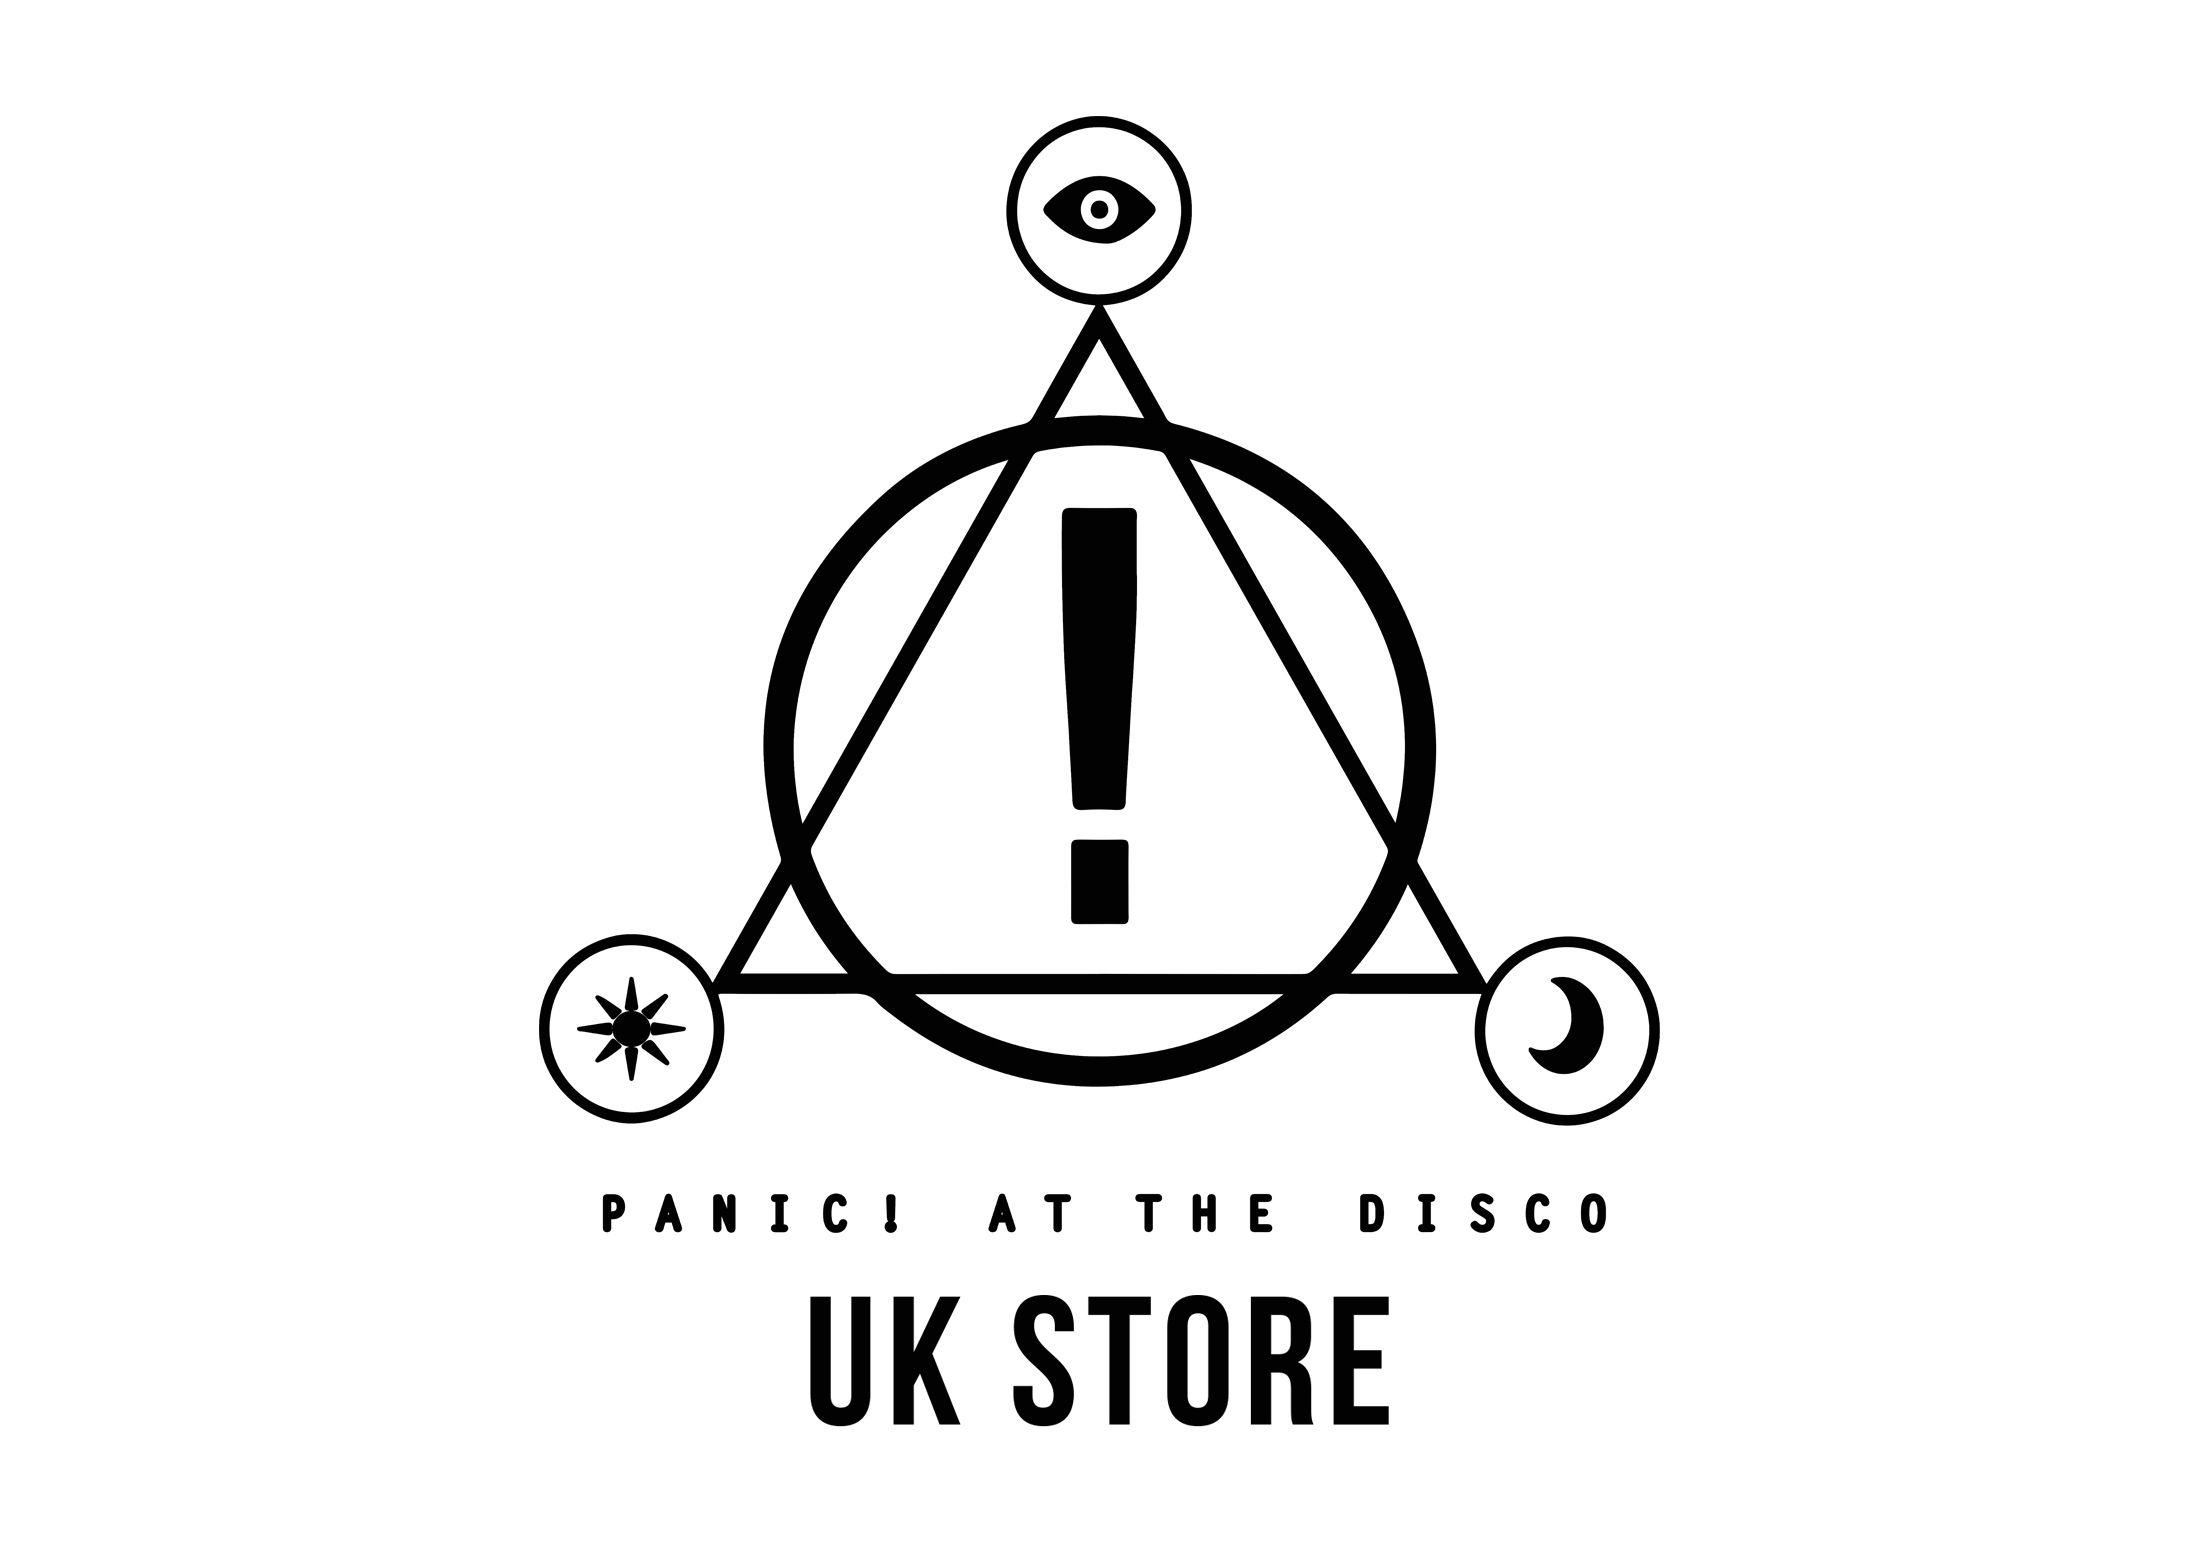 Disco Logo - Meaning Panic at the Disco logo and symbol | history and evolution